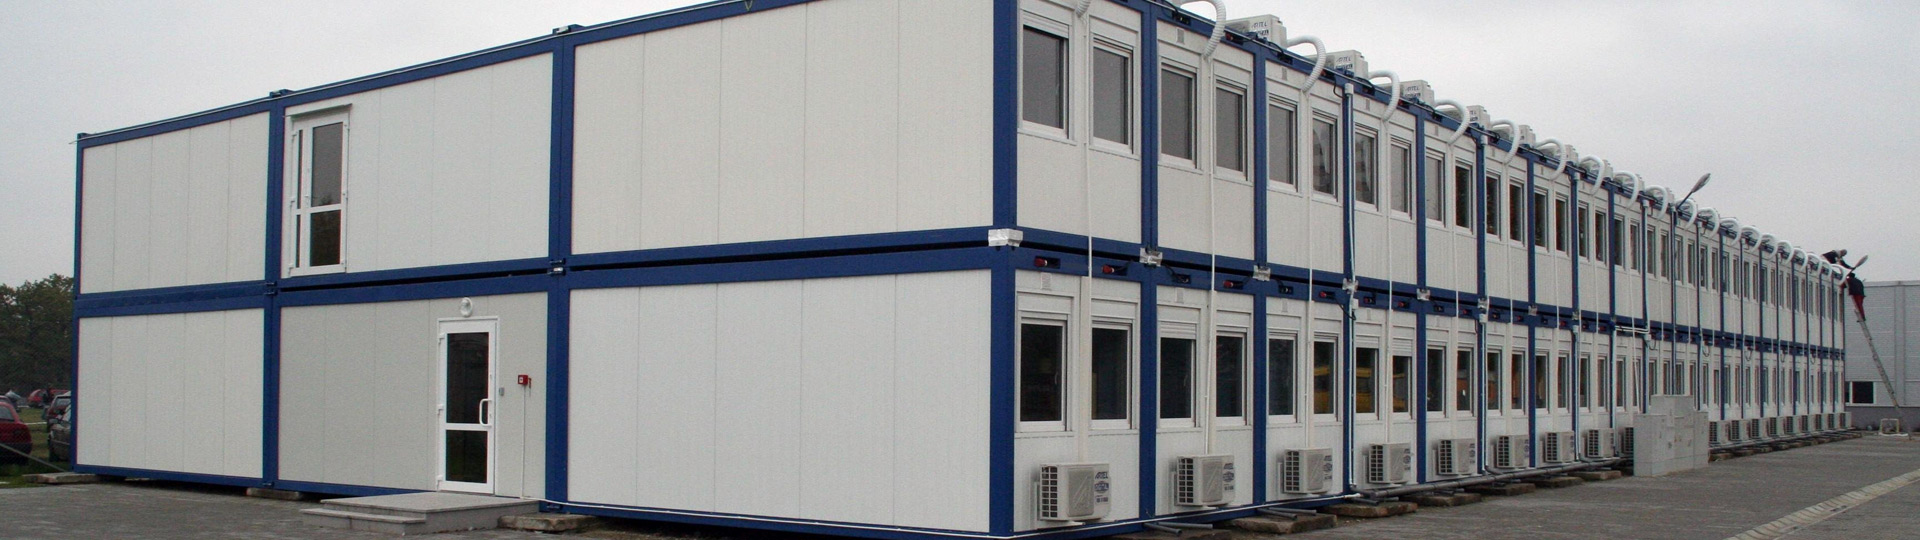 Weldon containers modular buildings